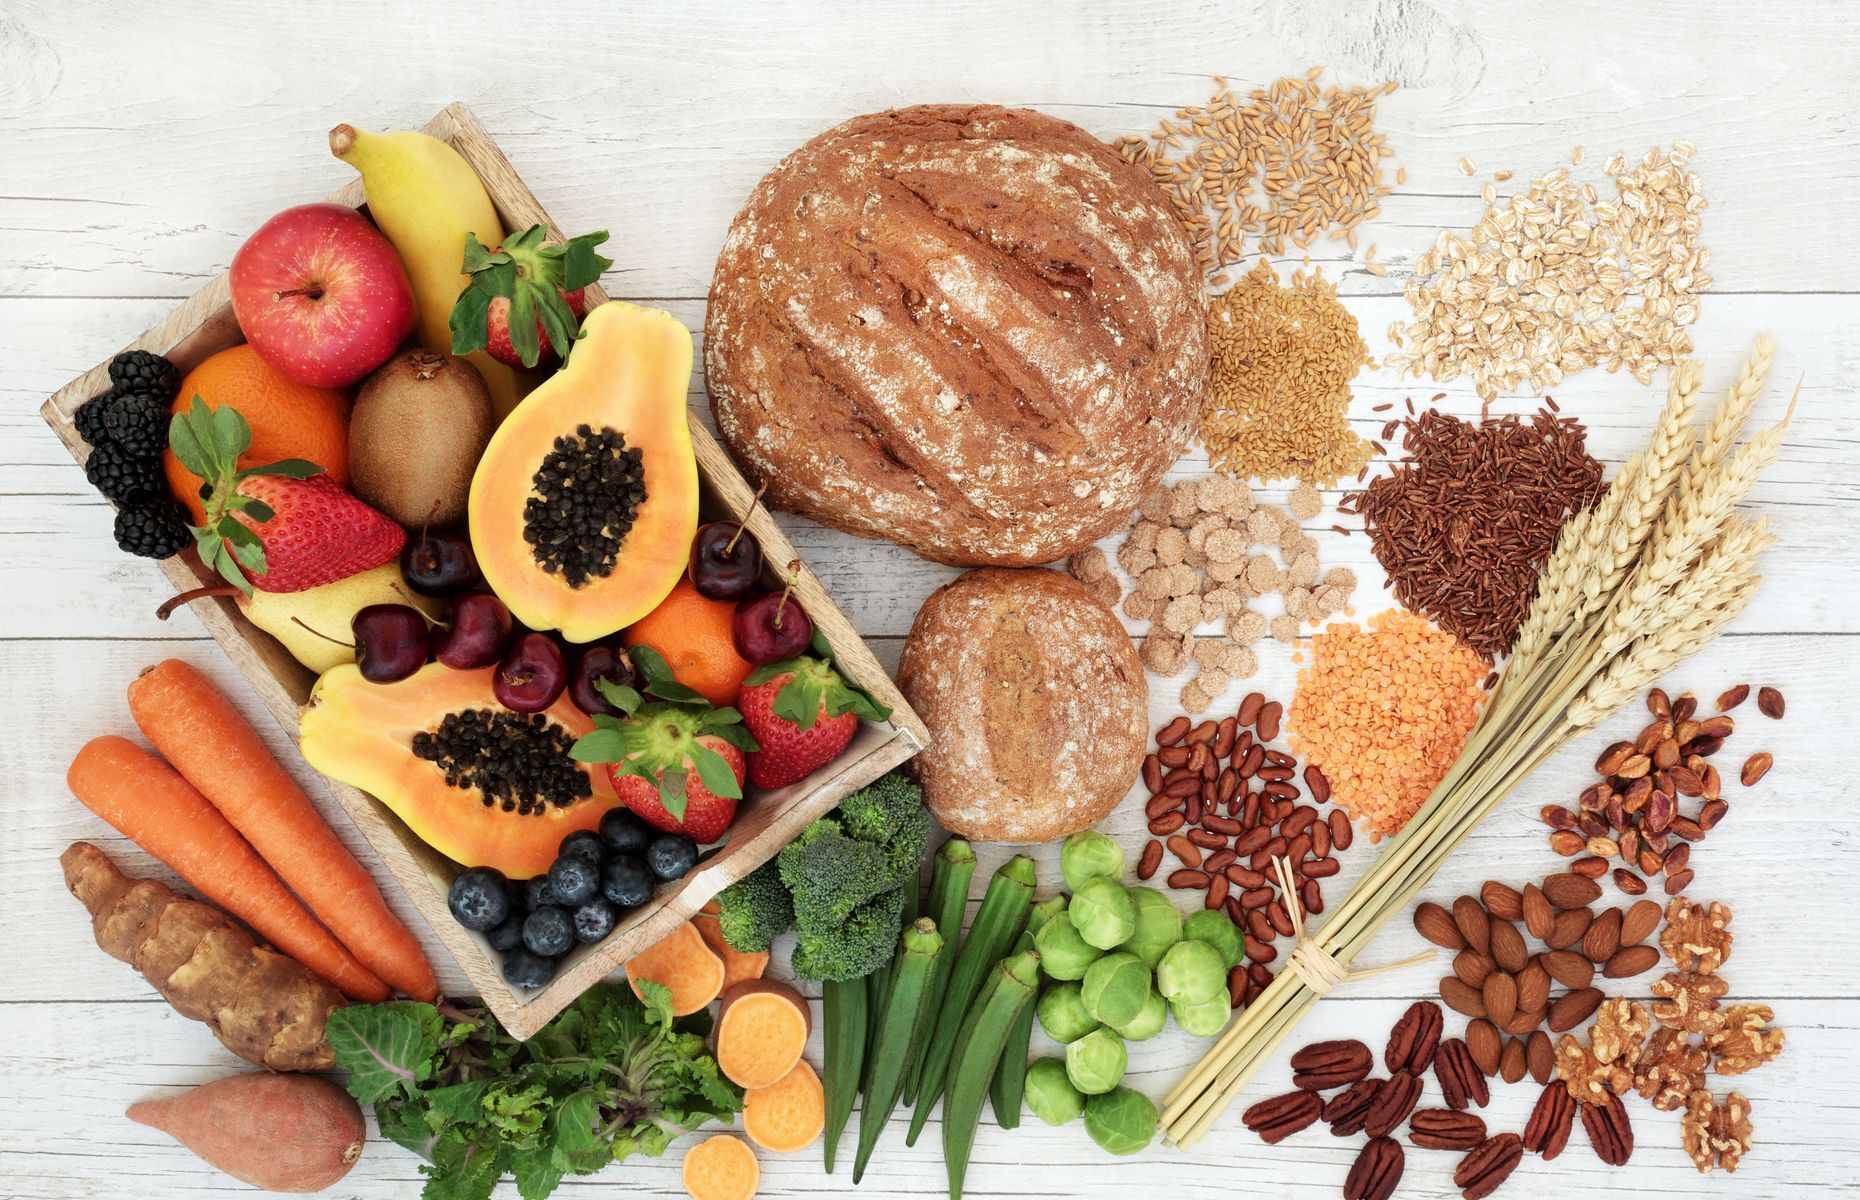 <p>On the other hand, if you’re constipated, you should prioritize <a href="https://www.everydayhealth.com/diet-nutrition/diet/fiber-benefits-food-sources-supplements-side-effects/">fibre-rich foods</a> such as chickpeas, celery, and whole-grains. These foods help accelerate bowel transit times and relieve constipation. Fibre also plays an important role in the <a href="https://www.familiprix.com/en/articles/dietary-fibre">prevention of diseases</a> such as stroke, diabetes, colon cancer, and heart disease, which is why it’s important to include plenty of fibre in your diet.</p>